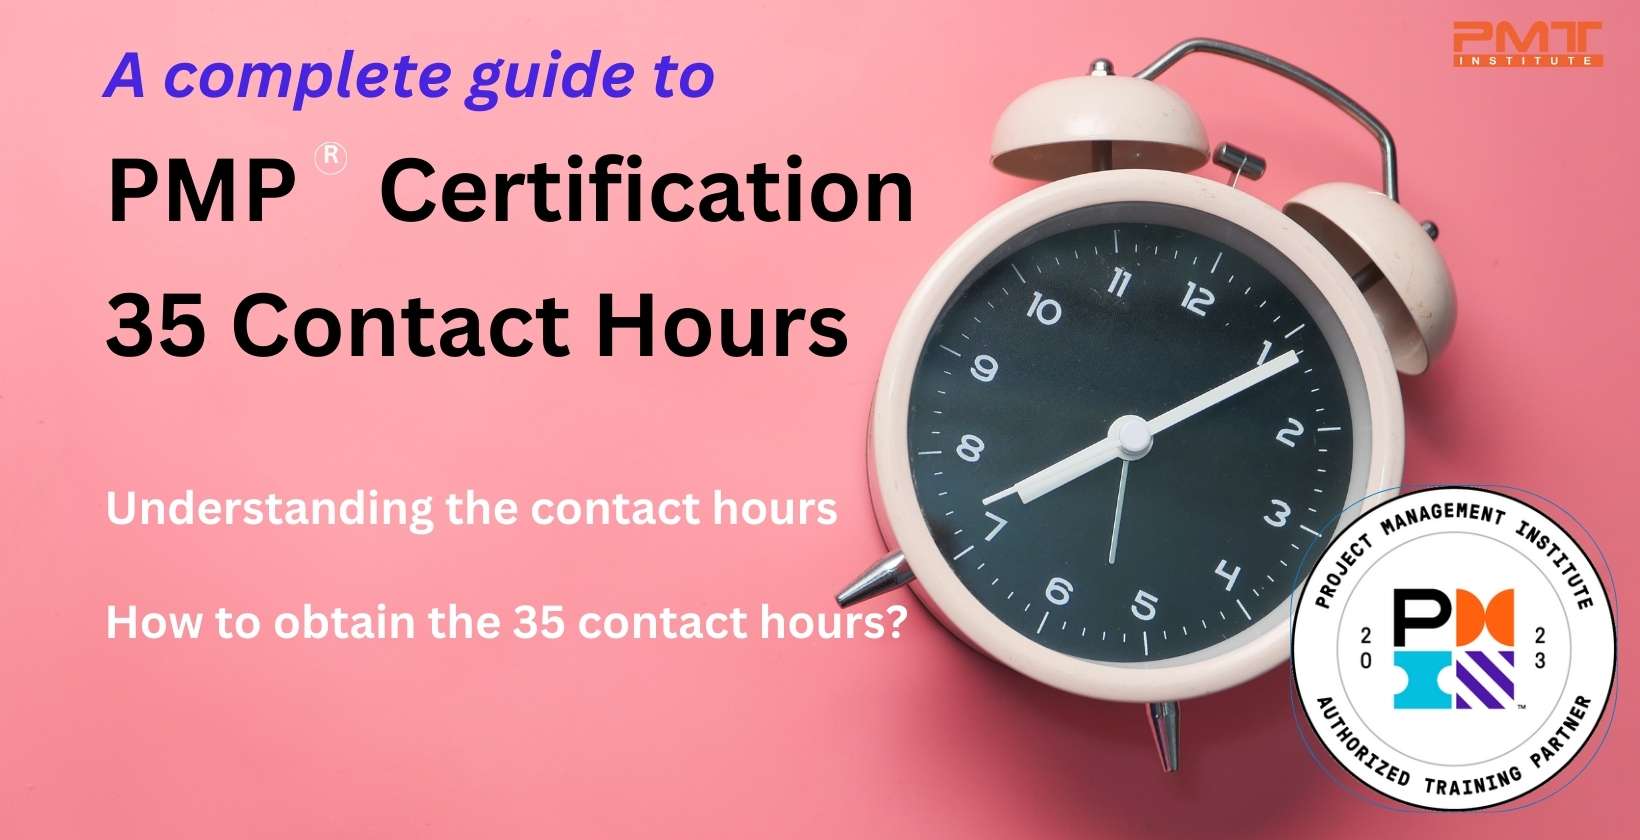 How to complete the 35 contact hours of PMP exam?